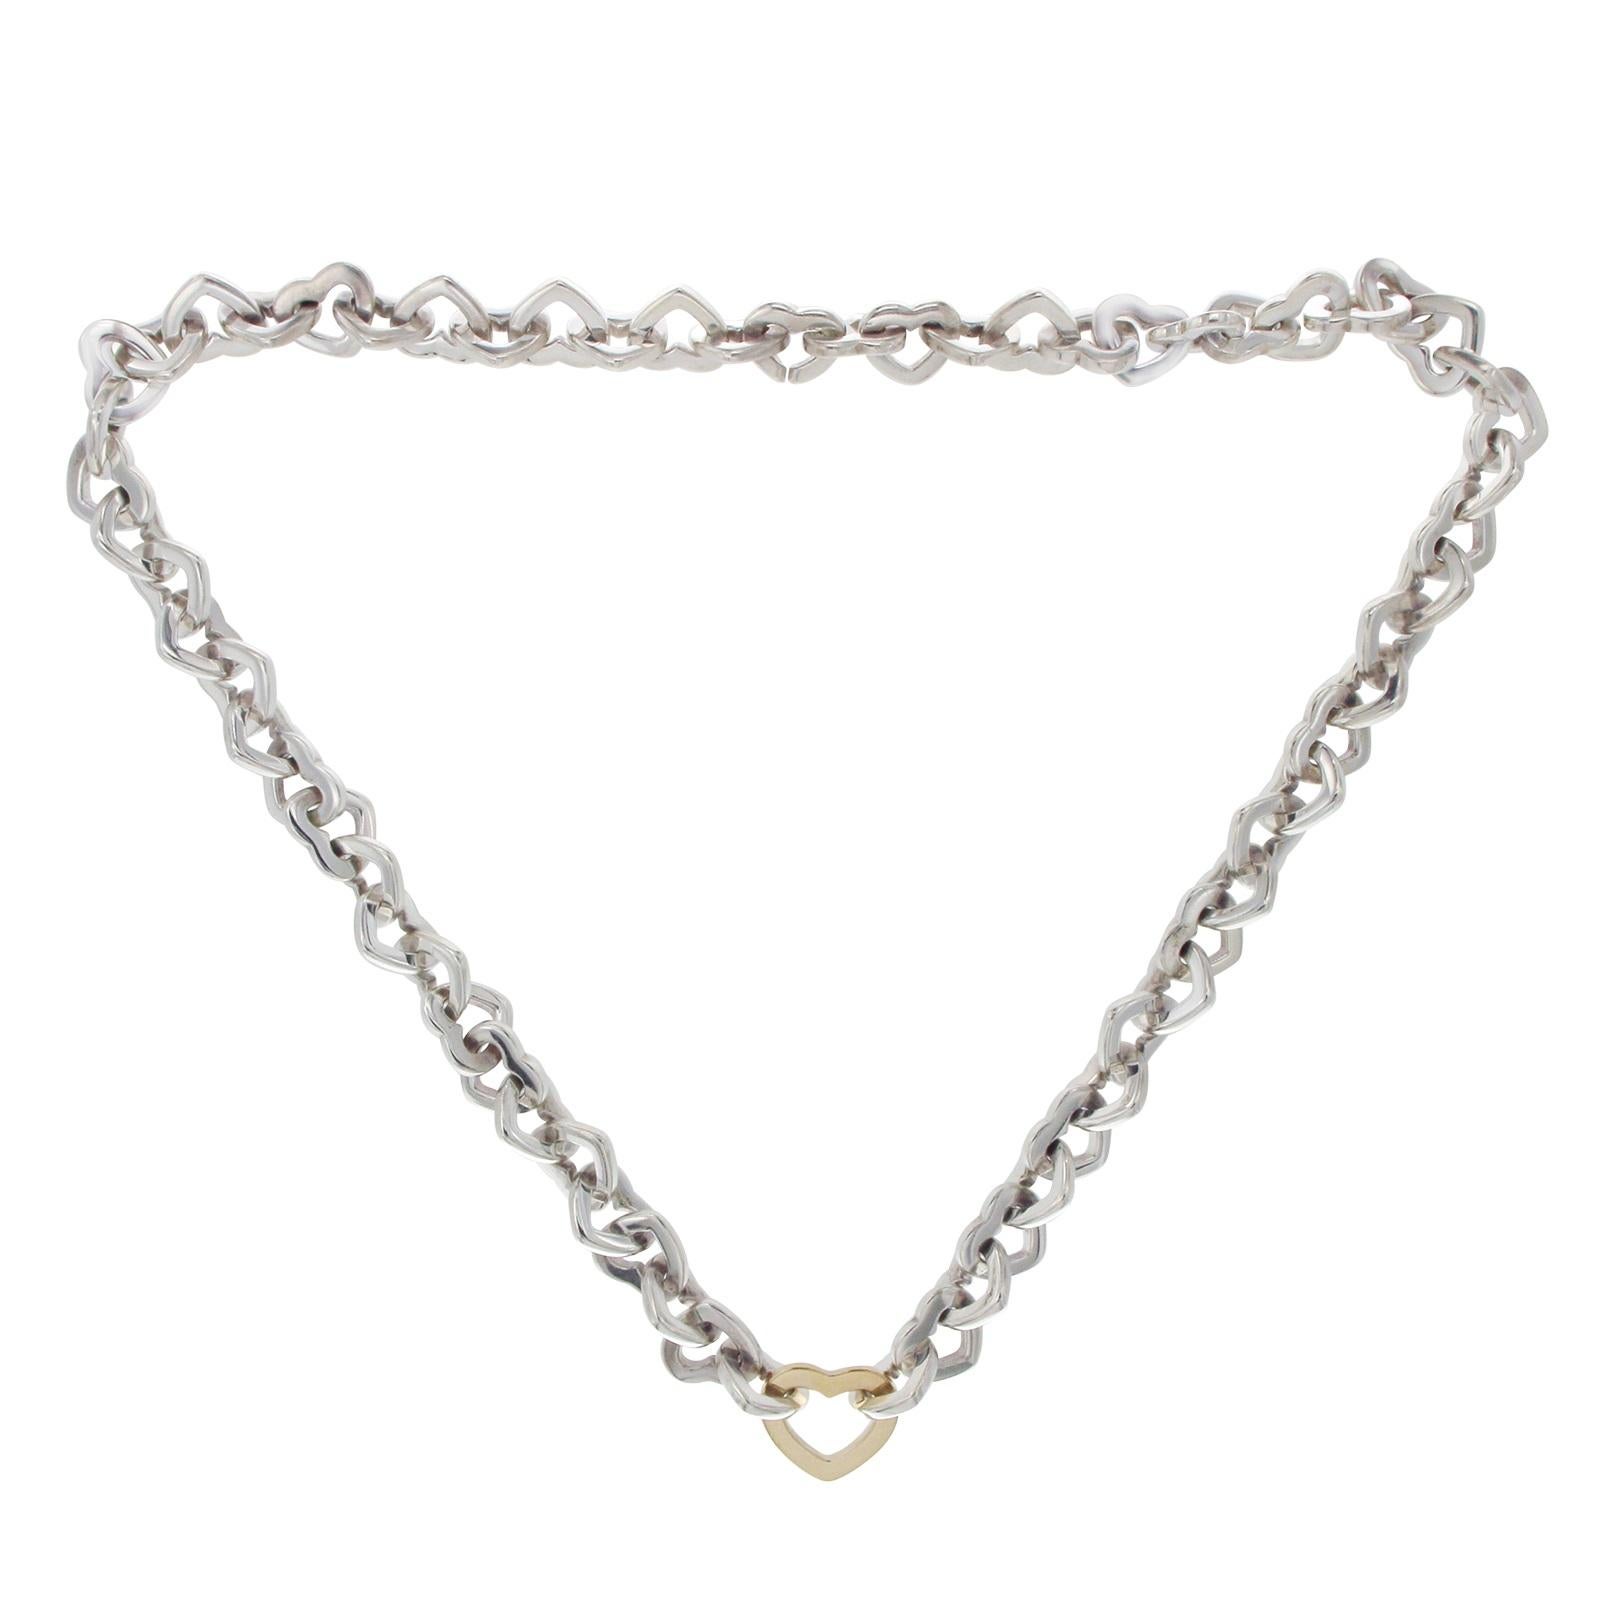 Large chain in sterling silver, 20